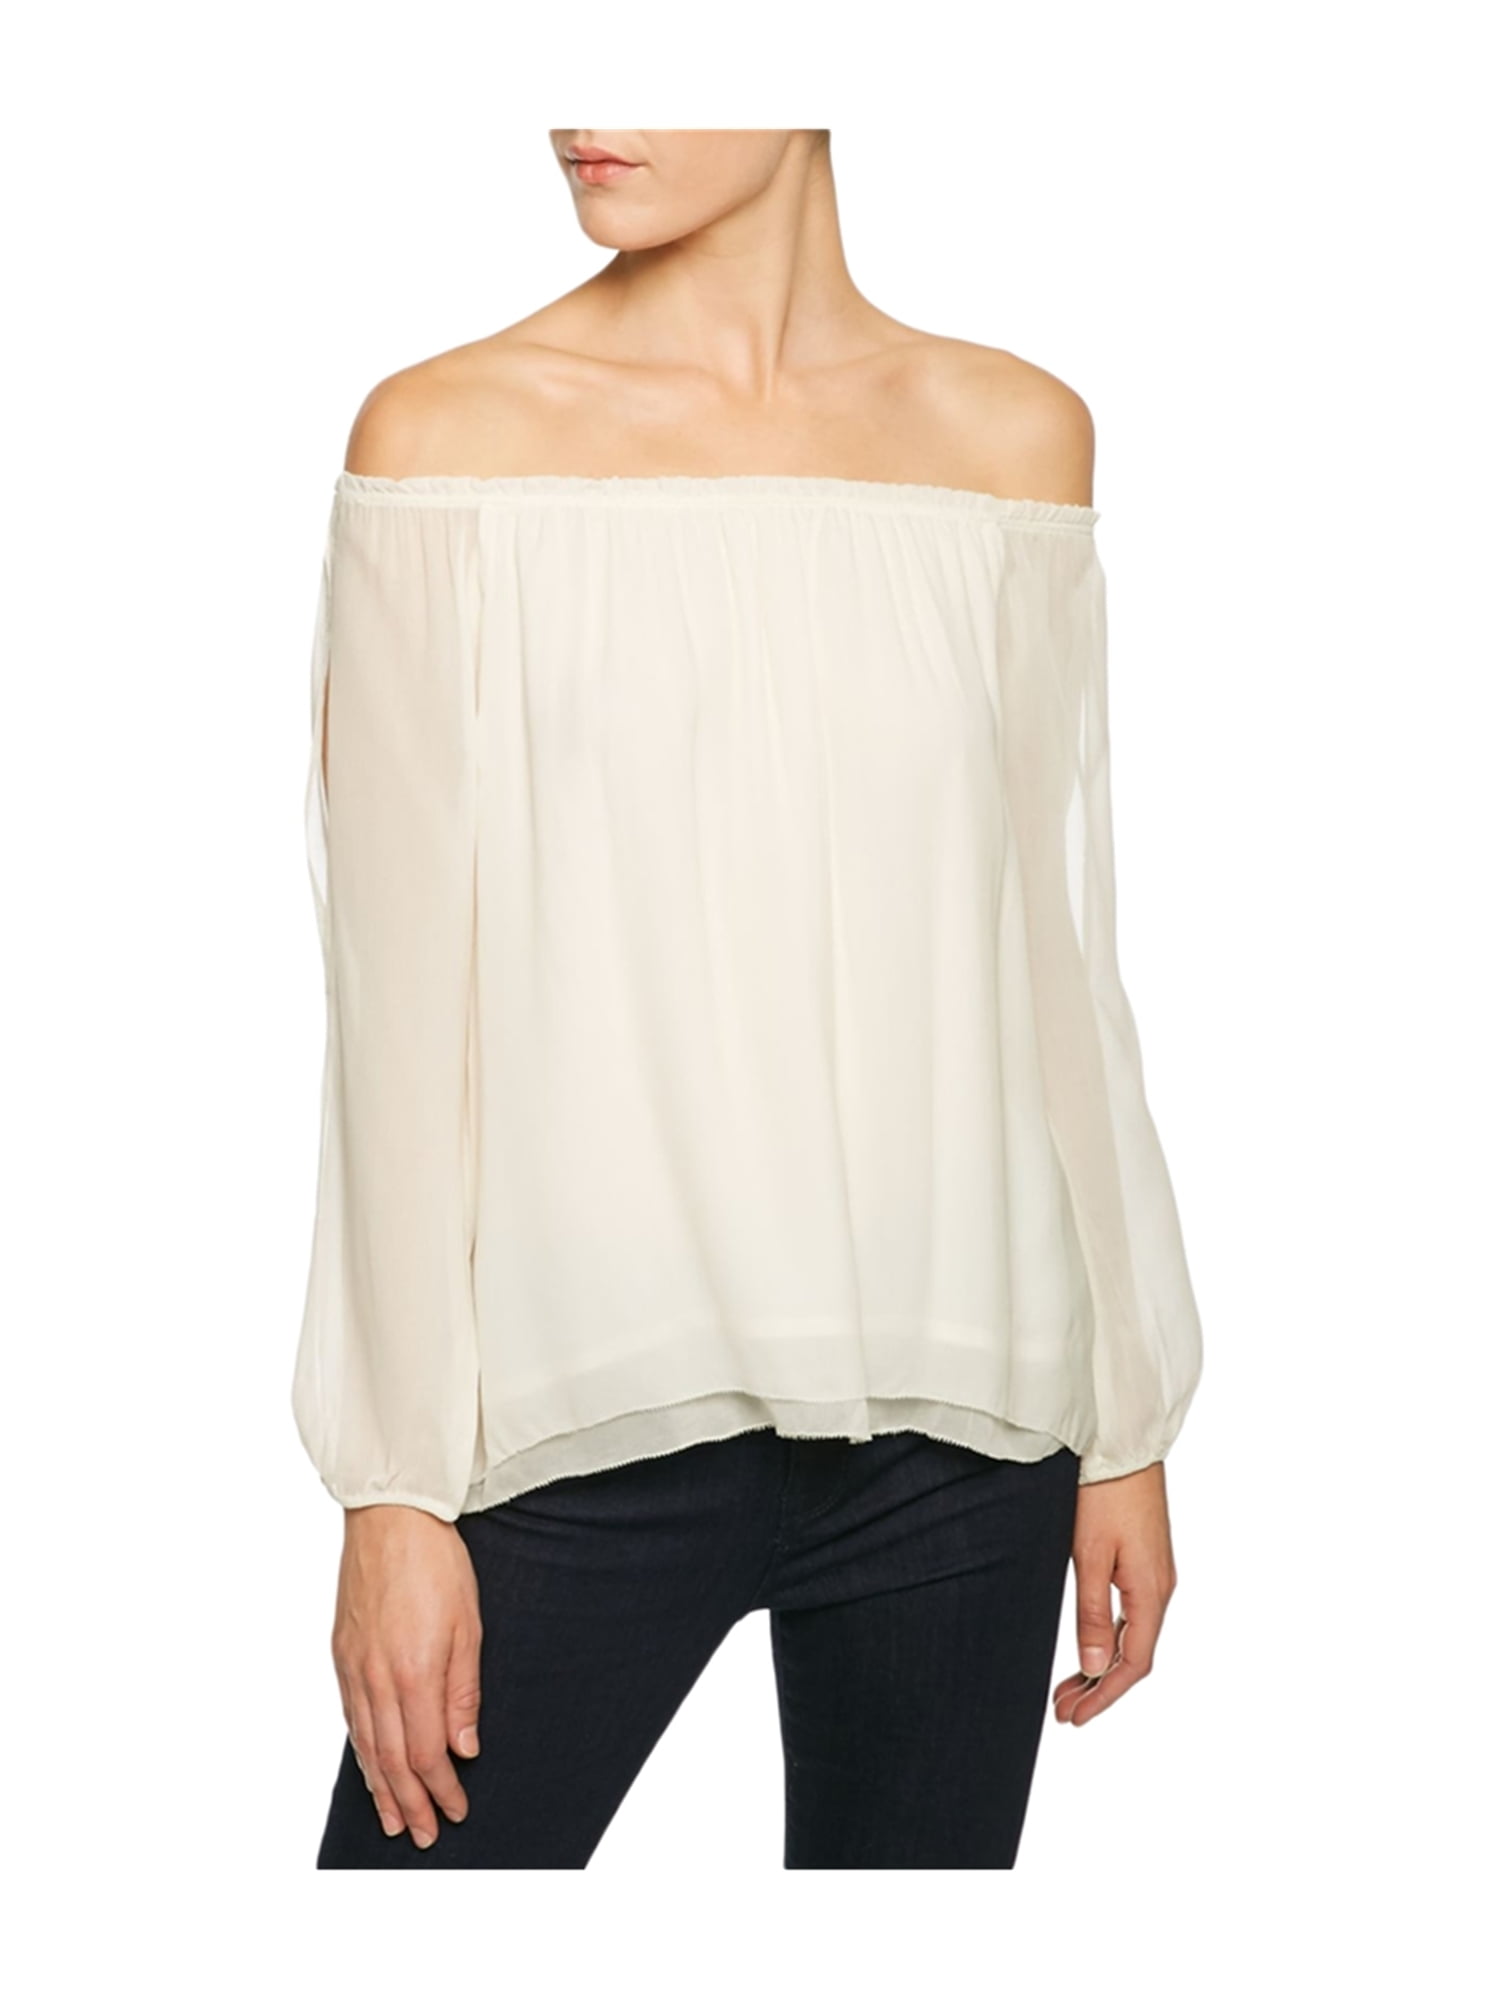 Sanctuary Clothing - Sanctuary Clothing Womens Textured Pullover Blouse